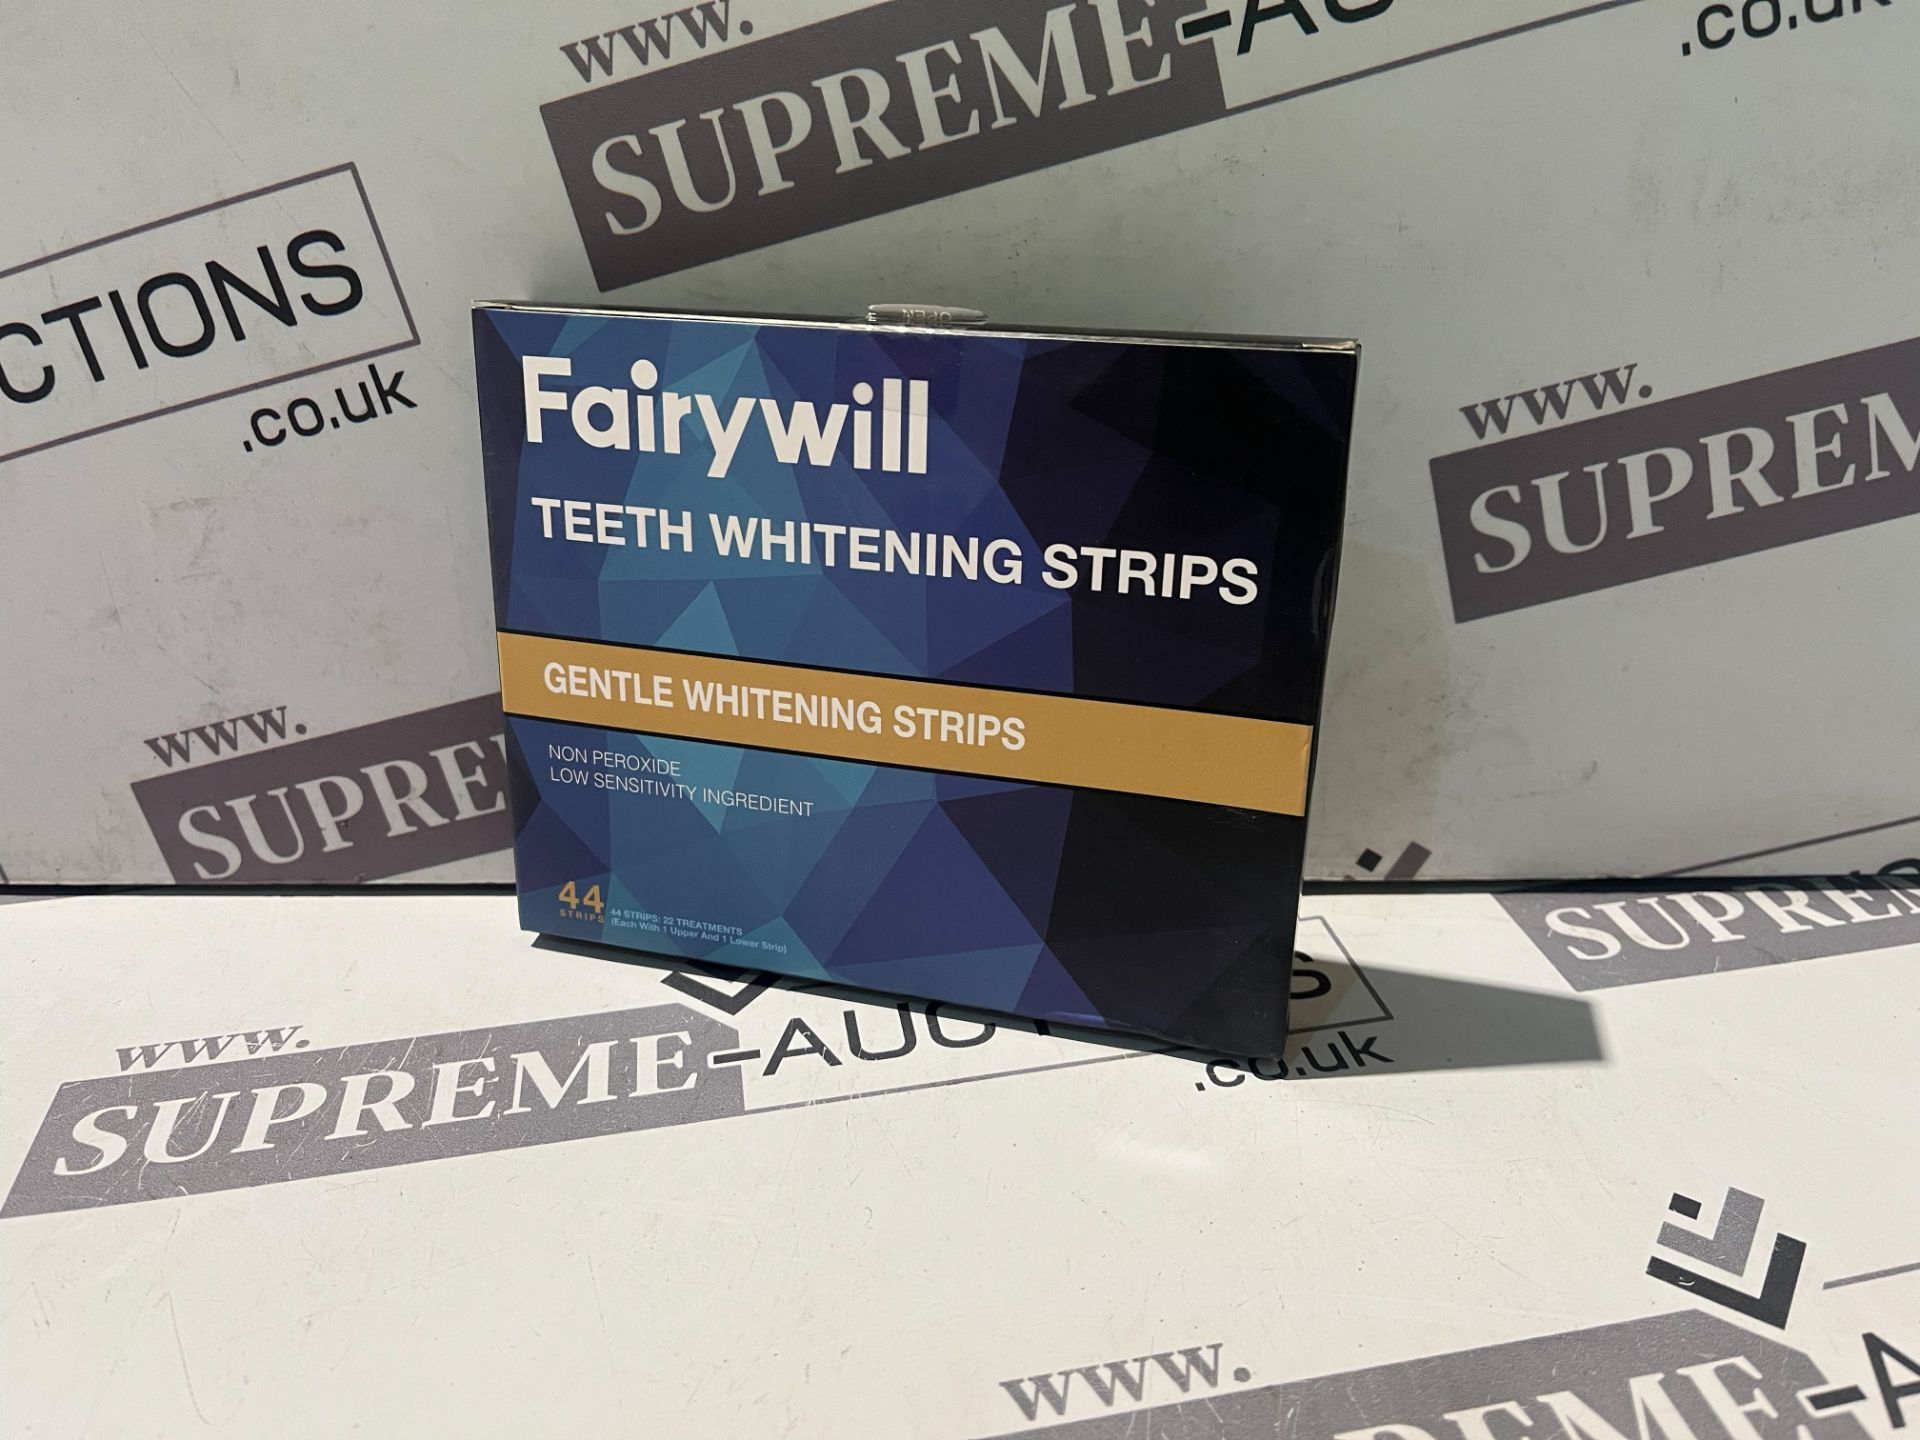 TRADE LOT 500 X BRAND NEW FAIRYWILL PACKS OF 44 GENTLE TEETH WHITENING KITS EXP JUNE 2023 R16-8